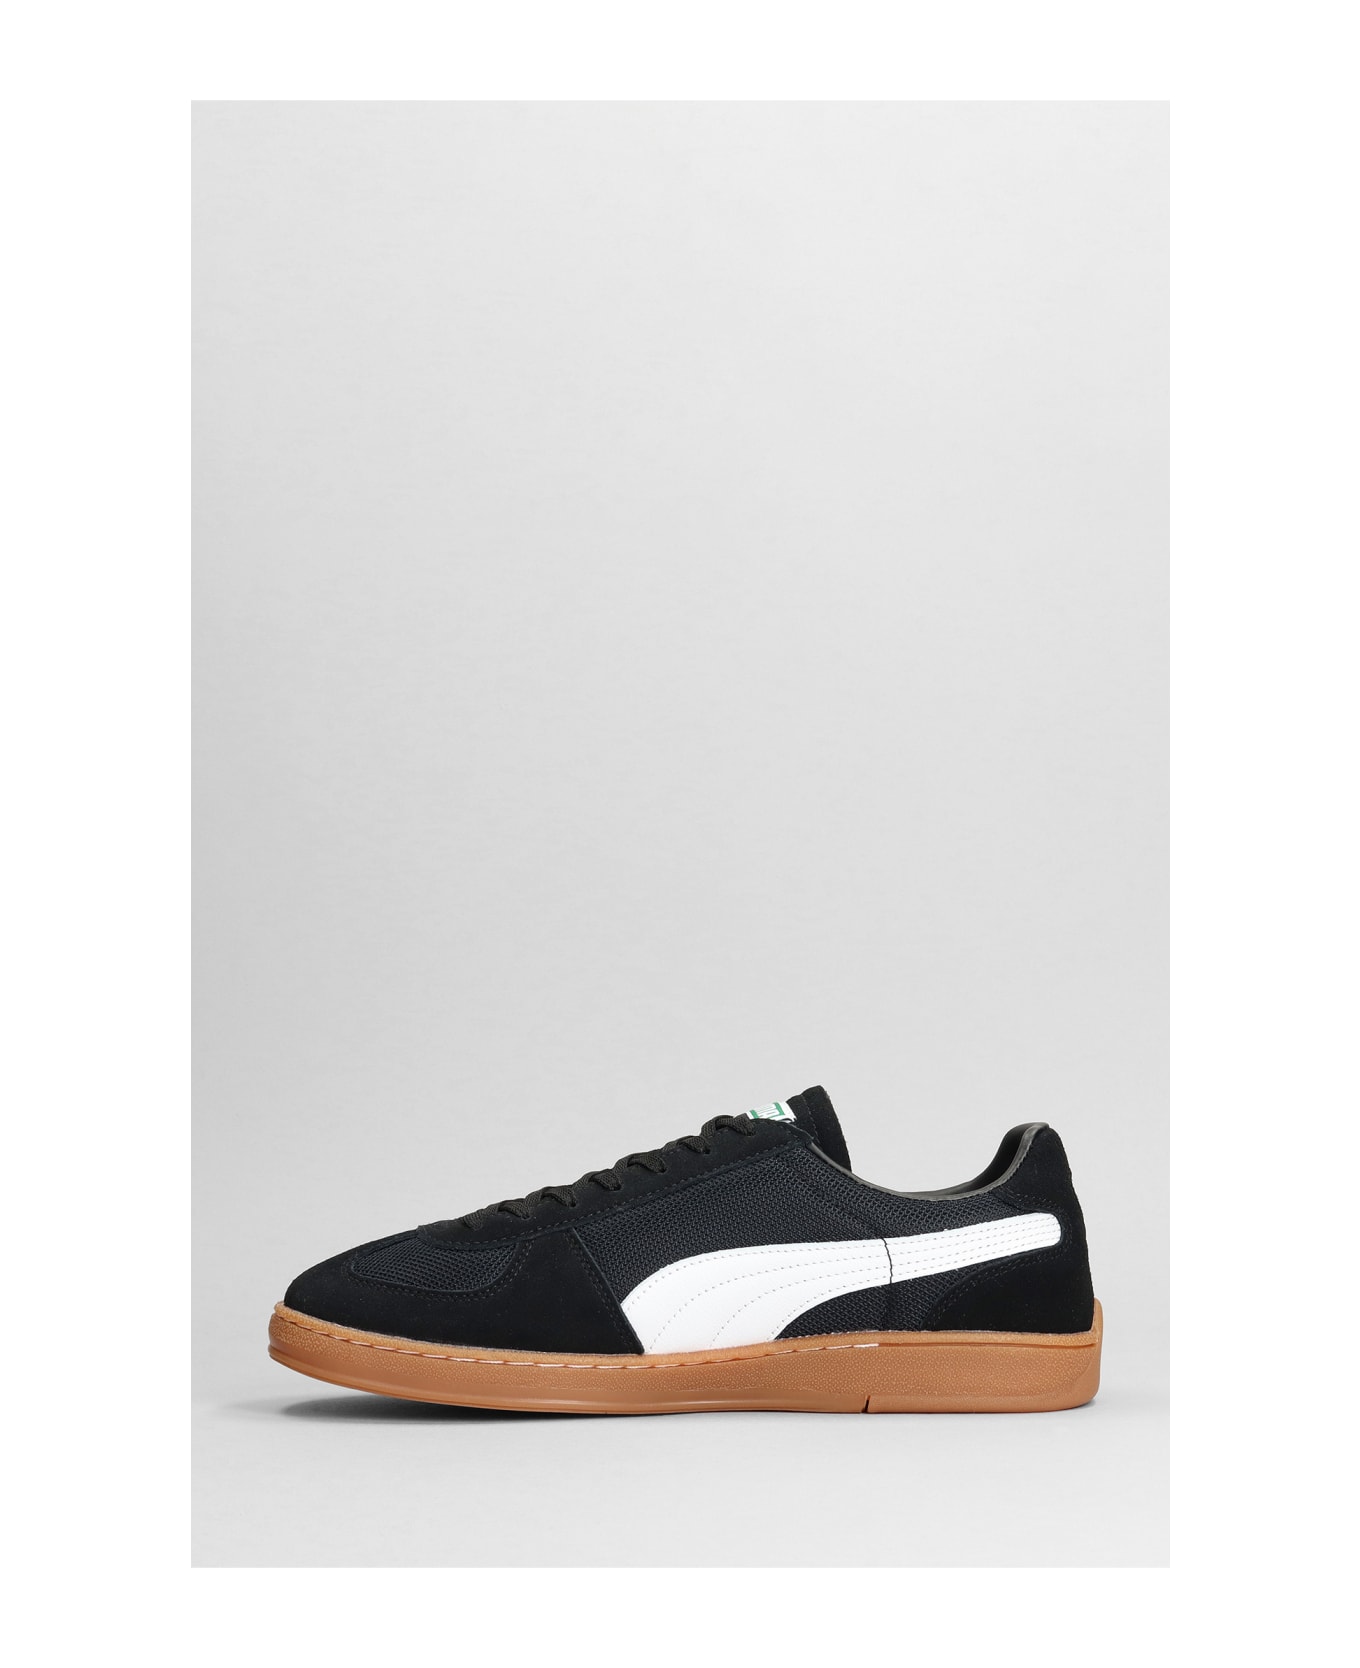 Puma Super Team Og Sneakers In Black Suede And Fabric - BLACK/WHITE